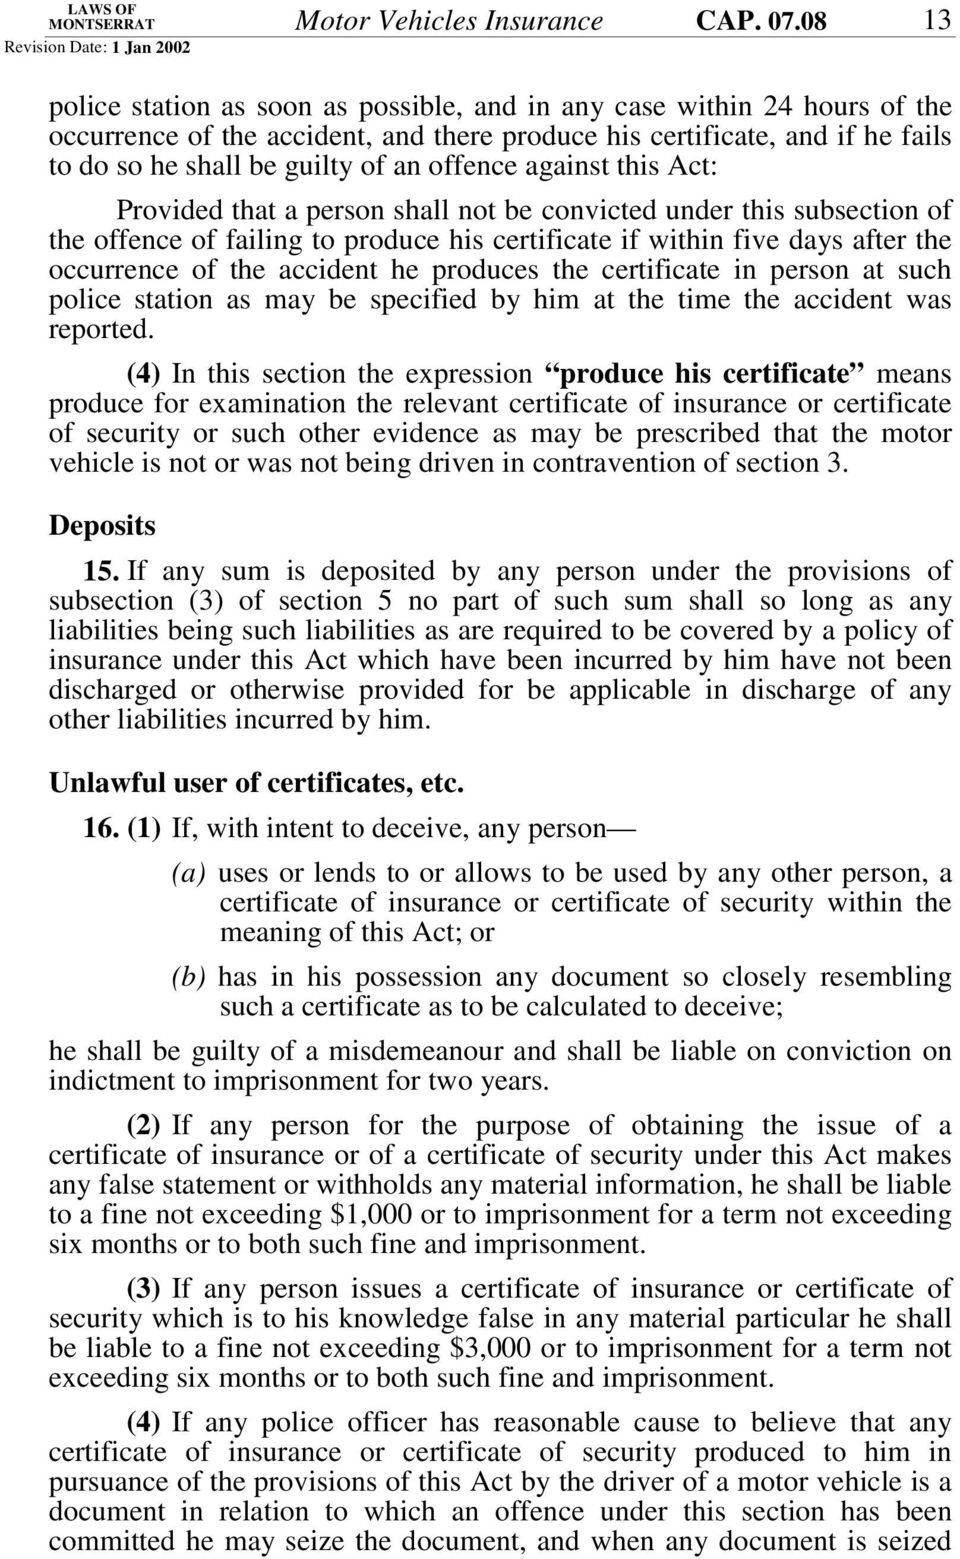 offence against this Act: Provided that a person shall not be convicted under this subsection of the offence of failing to produce his certificate if within five days after the occurrence of the